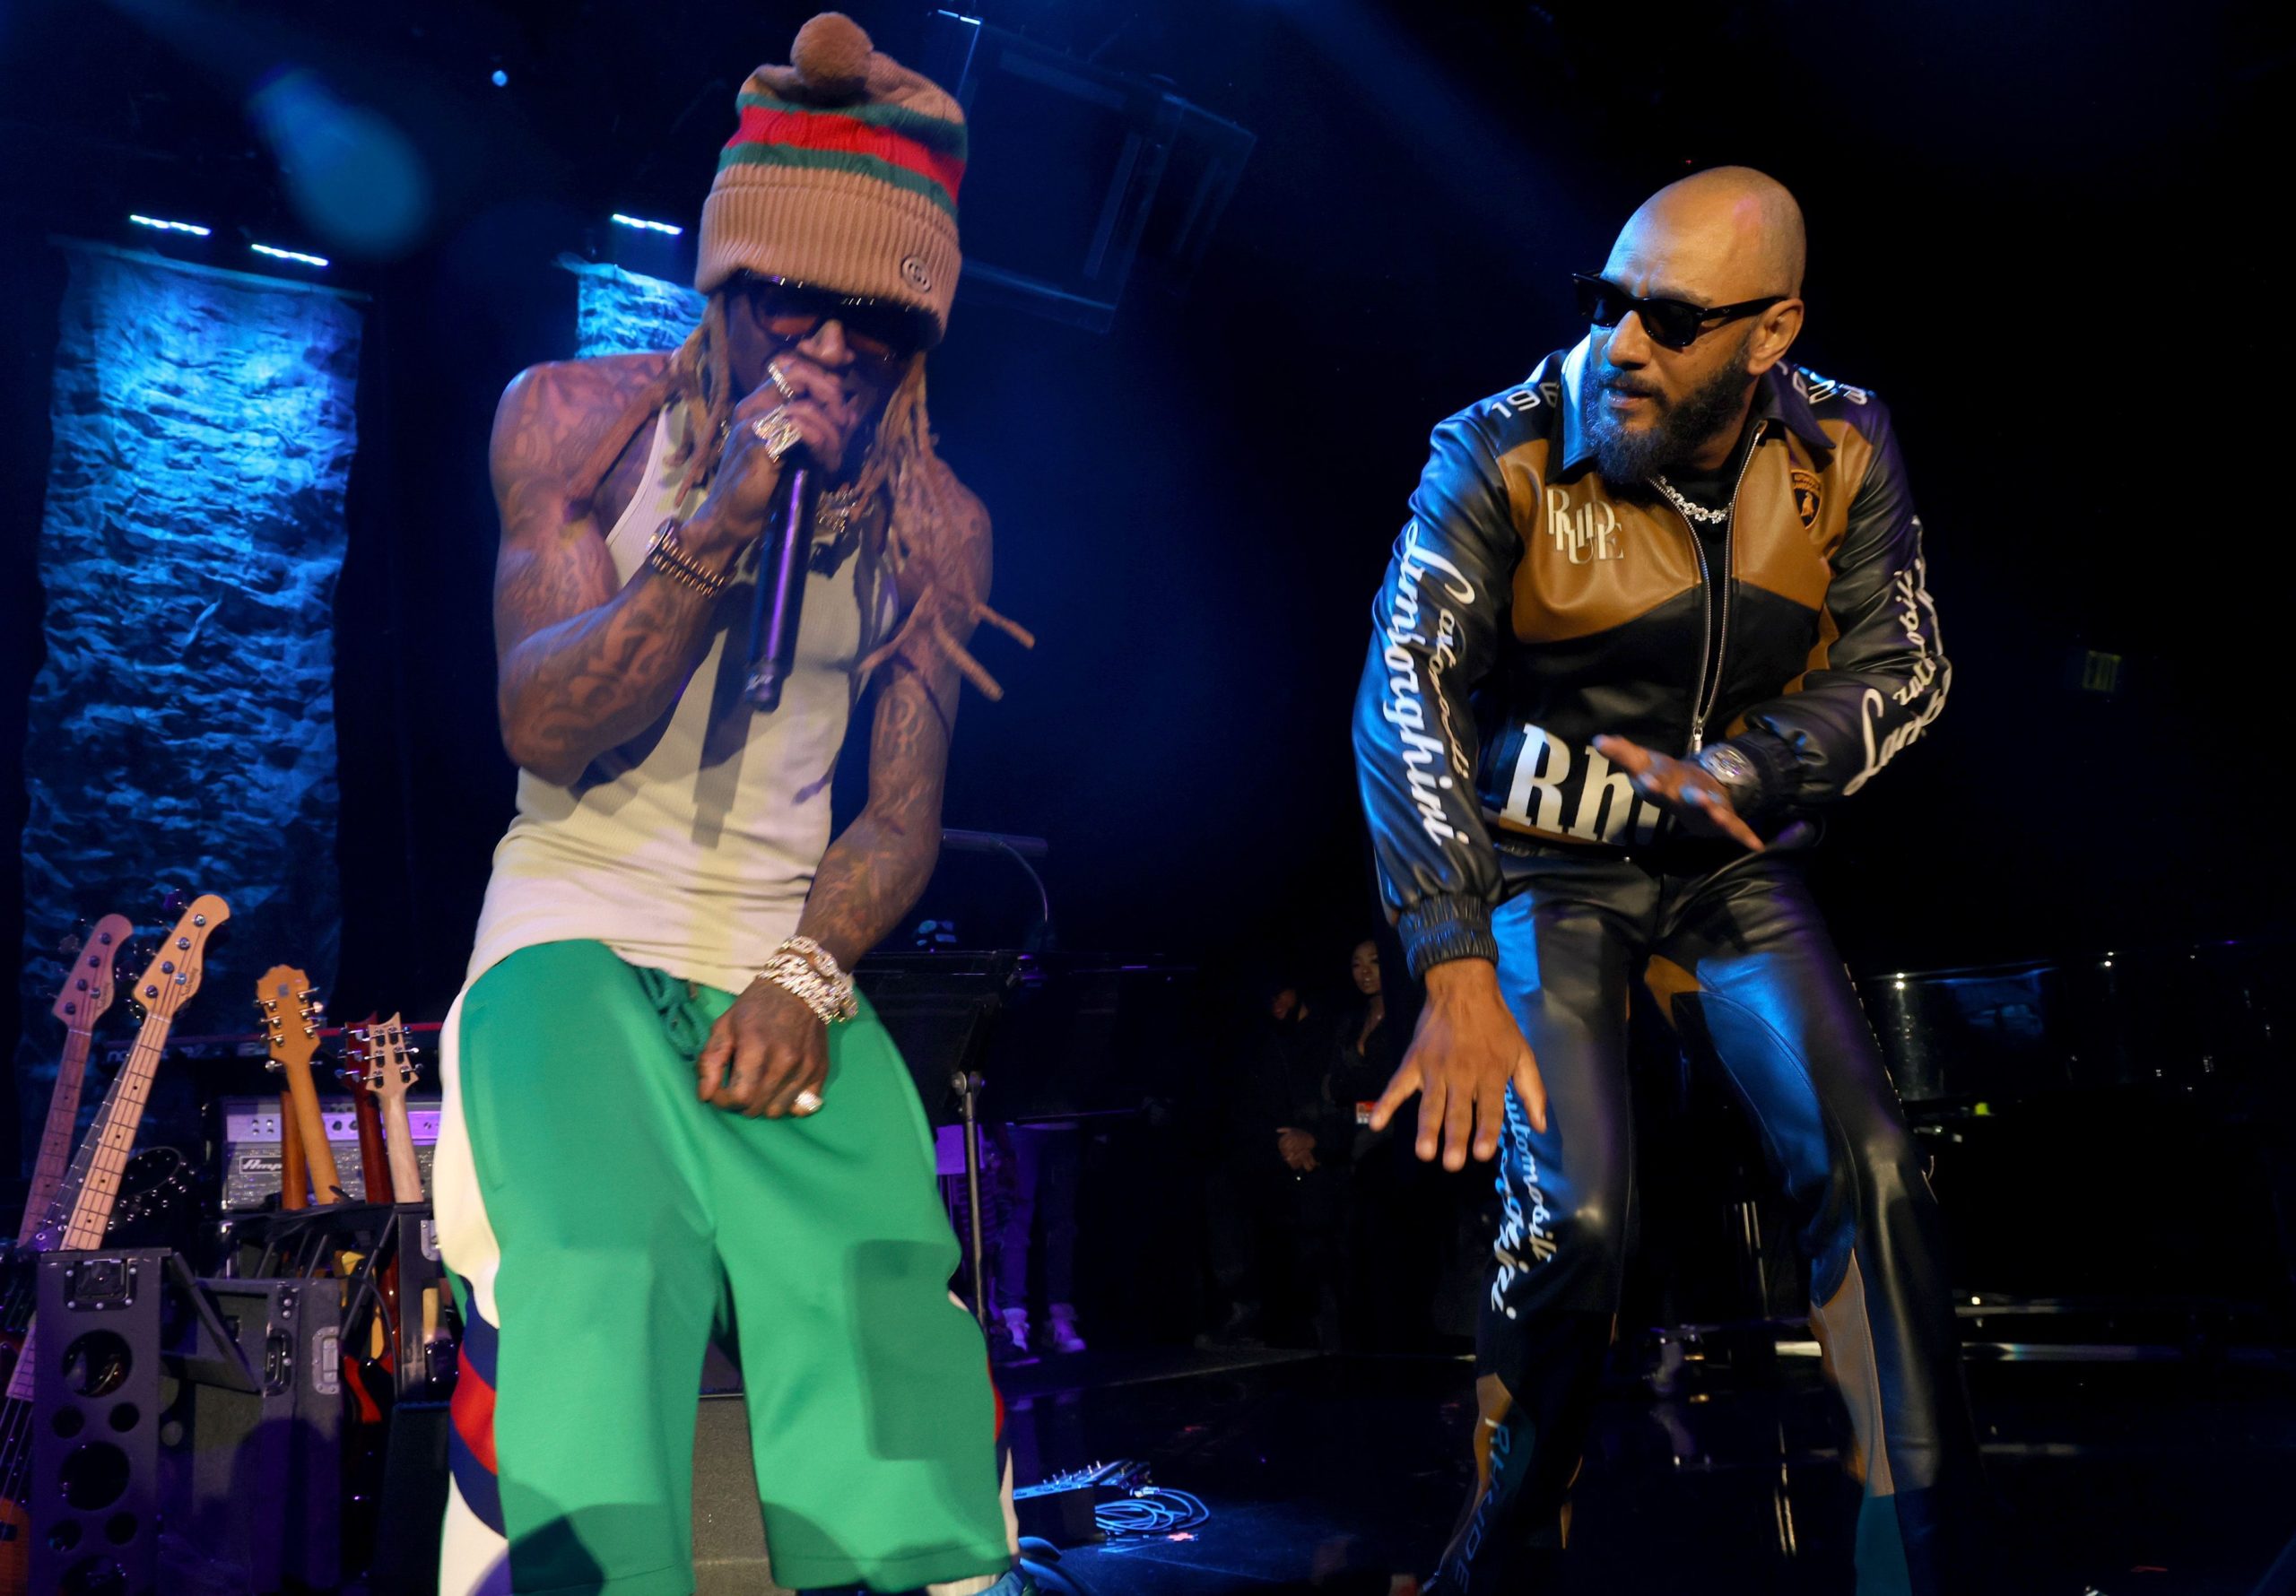 LOS ANGELES, CALIFORNIA - FEBRUARY 04: (L-R) Lil Wayne and Swizz Beatz perform onstage during the Pre-GRAMMY Gala & GRAMMY Salute to Industry Icons Honoring Julie Greenwald and Craig Kallman on February 04, 2023 in Los Angeles, California. (Photo by Johnny Nunez/Getty Images for The Recording Academy)